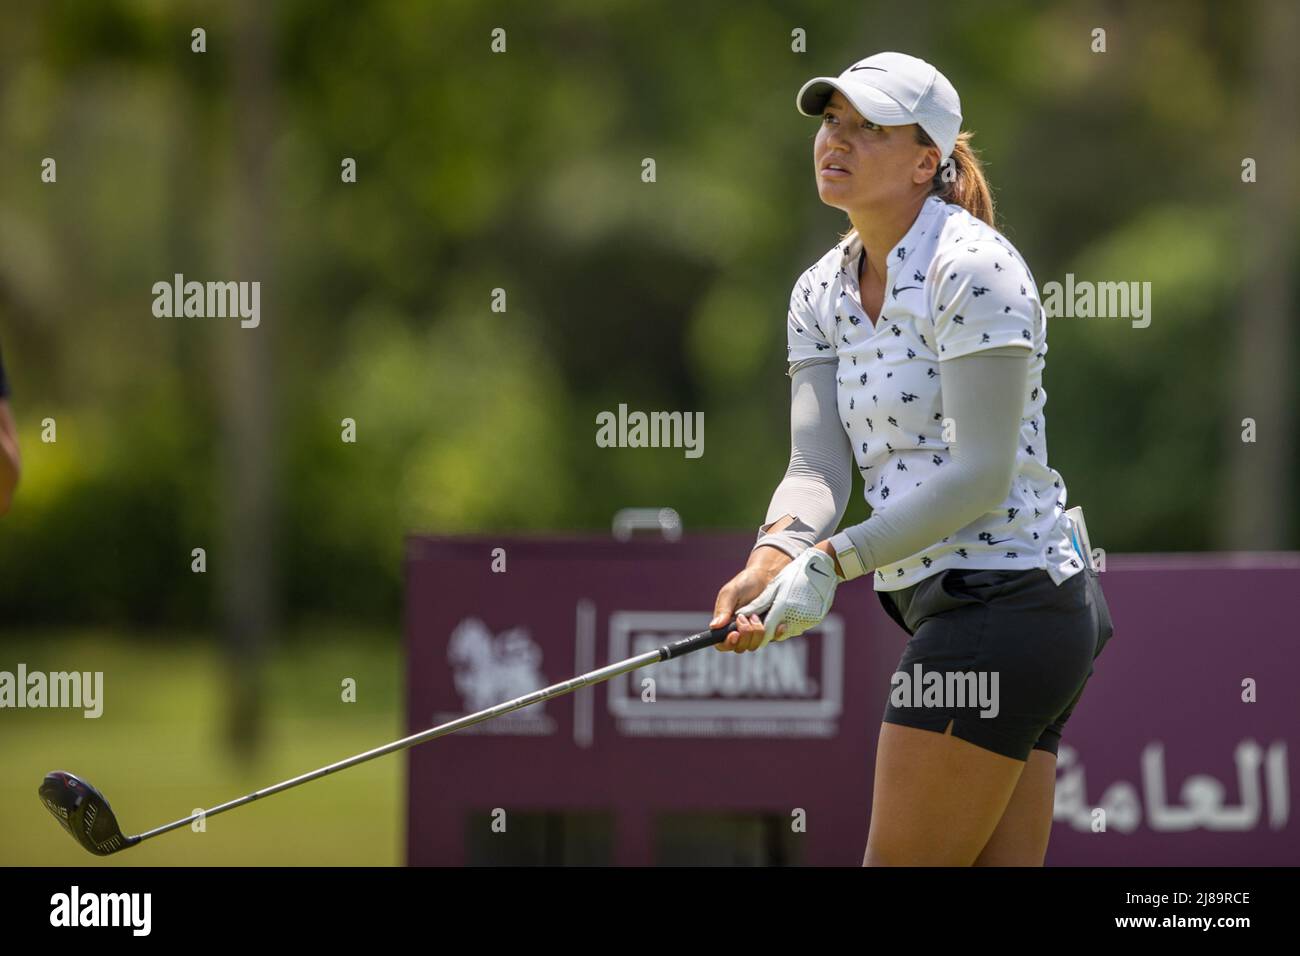 BANG KAPONG THAILAND - May 13: Isabella Deilert of Sweden follows her tee  shot on hole 4 during the second round of the Aramco Team Series at Thai  Country Club on May